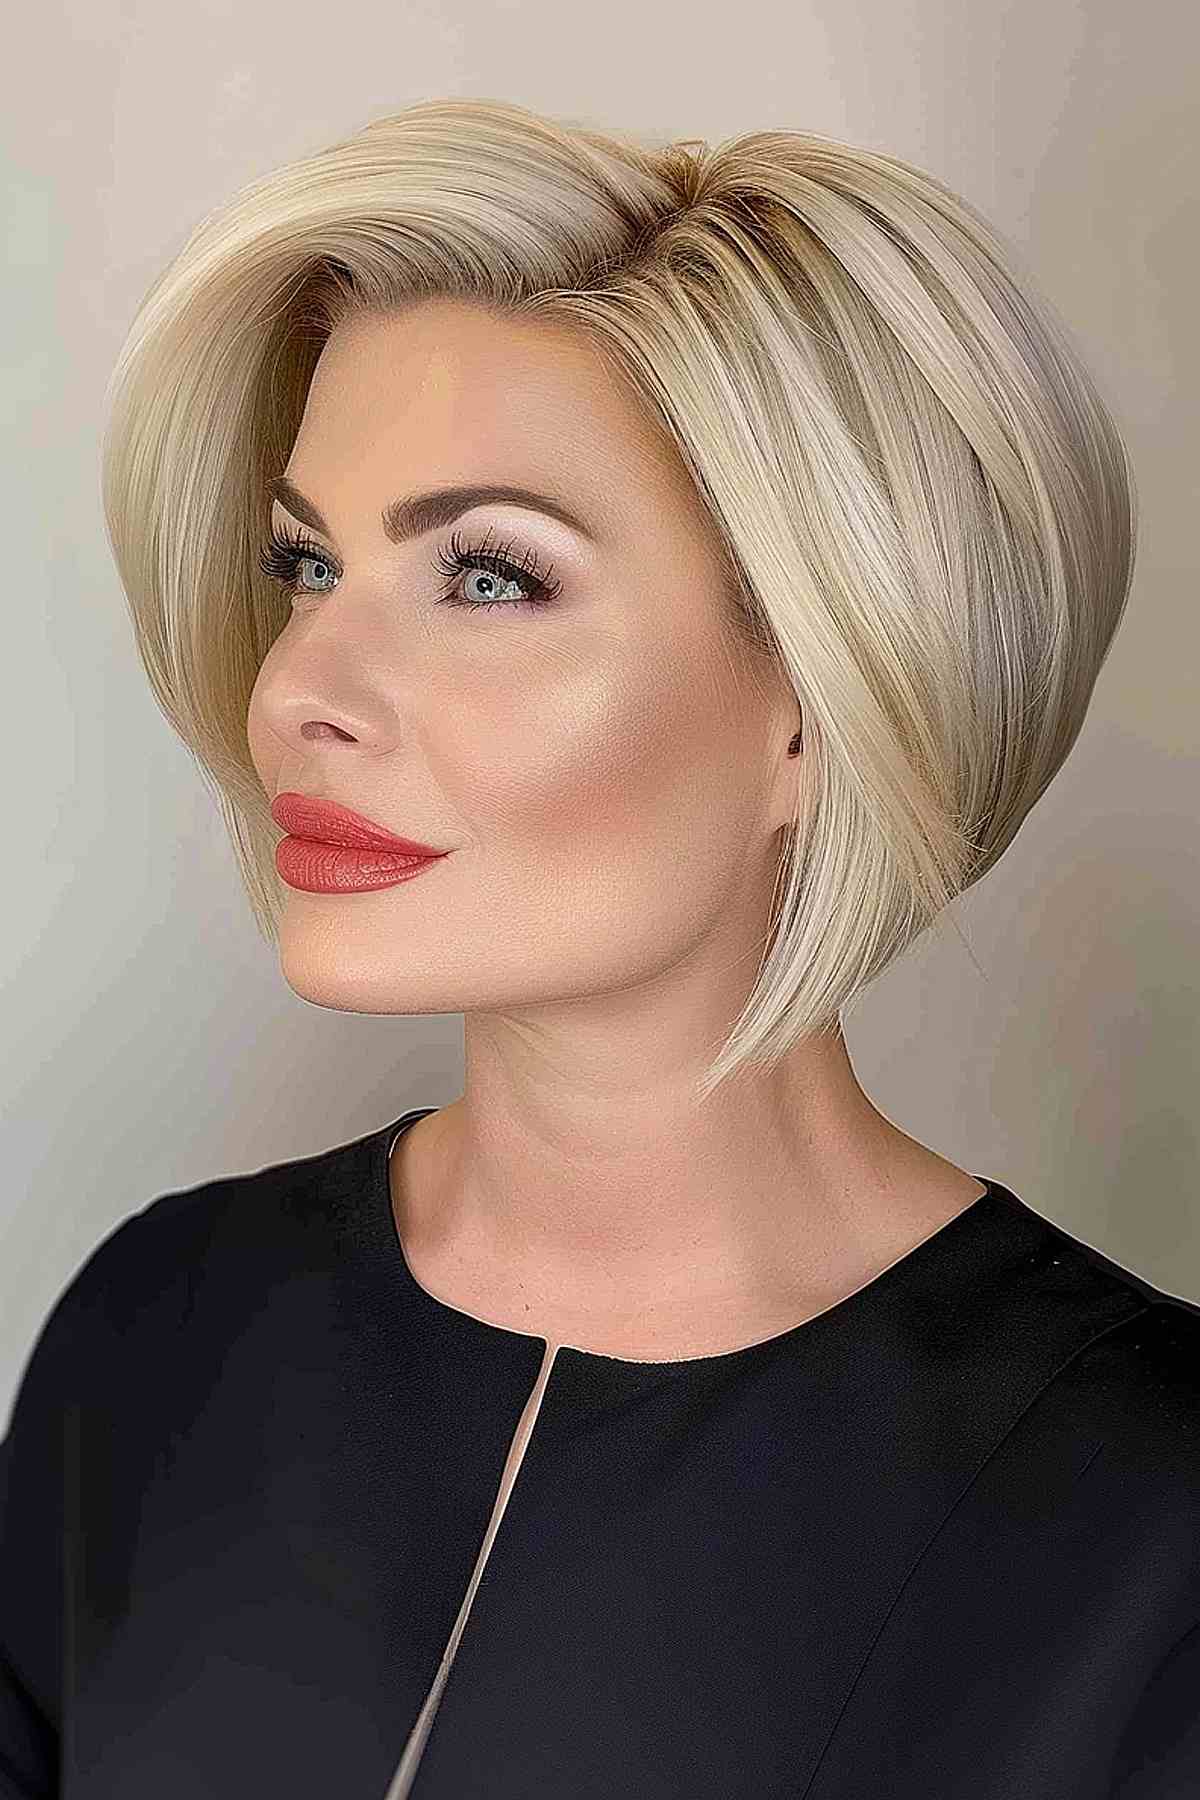 Short stacked bob with a side part for a square face shape.